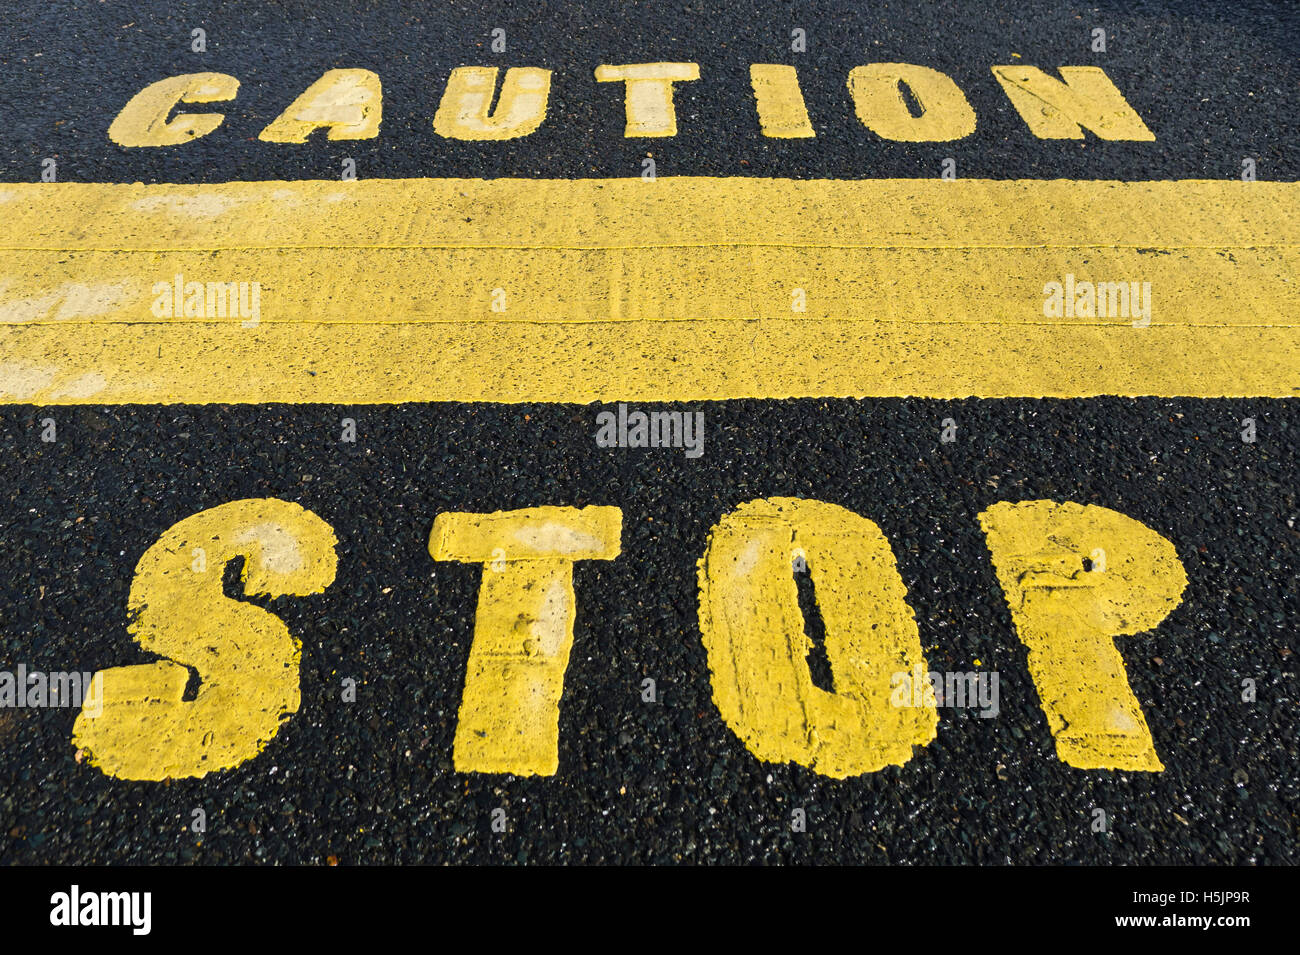 CAUTION STOP painted onto the road. Stock Photo